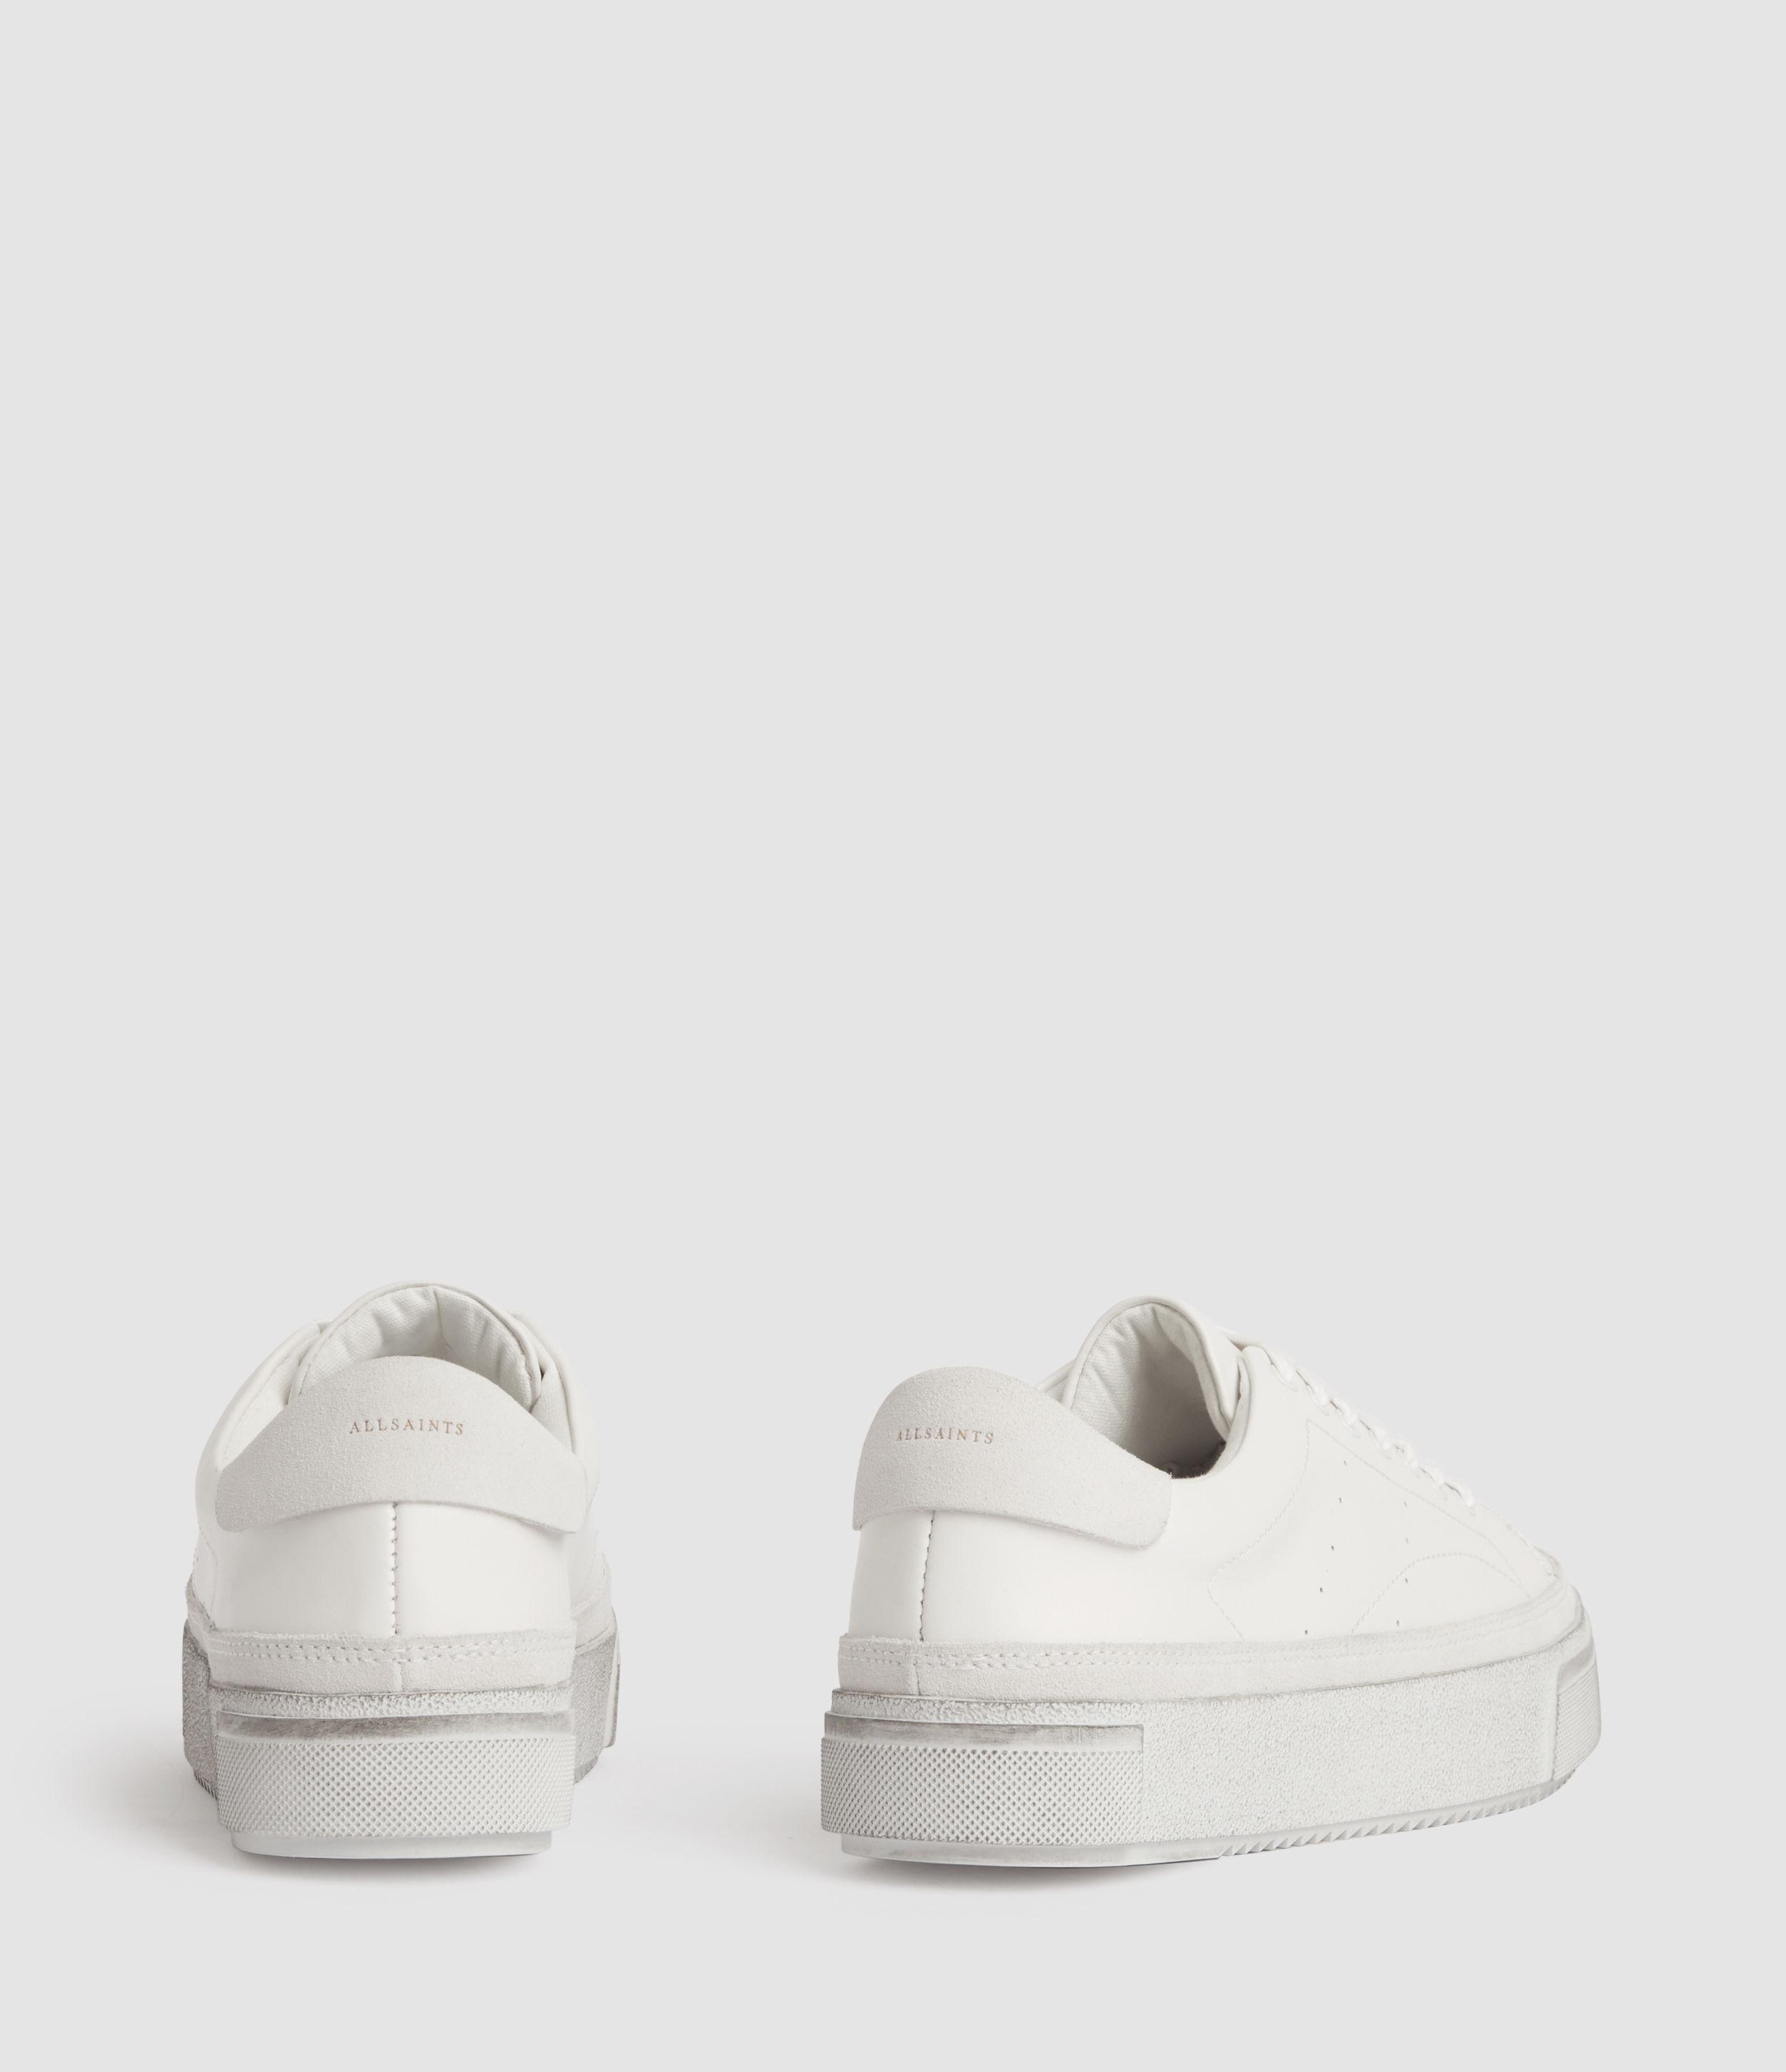 AllSaints Women's Leather Cow Trish Trainers in Chalk White (White) - Lyst